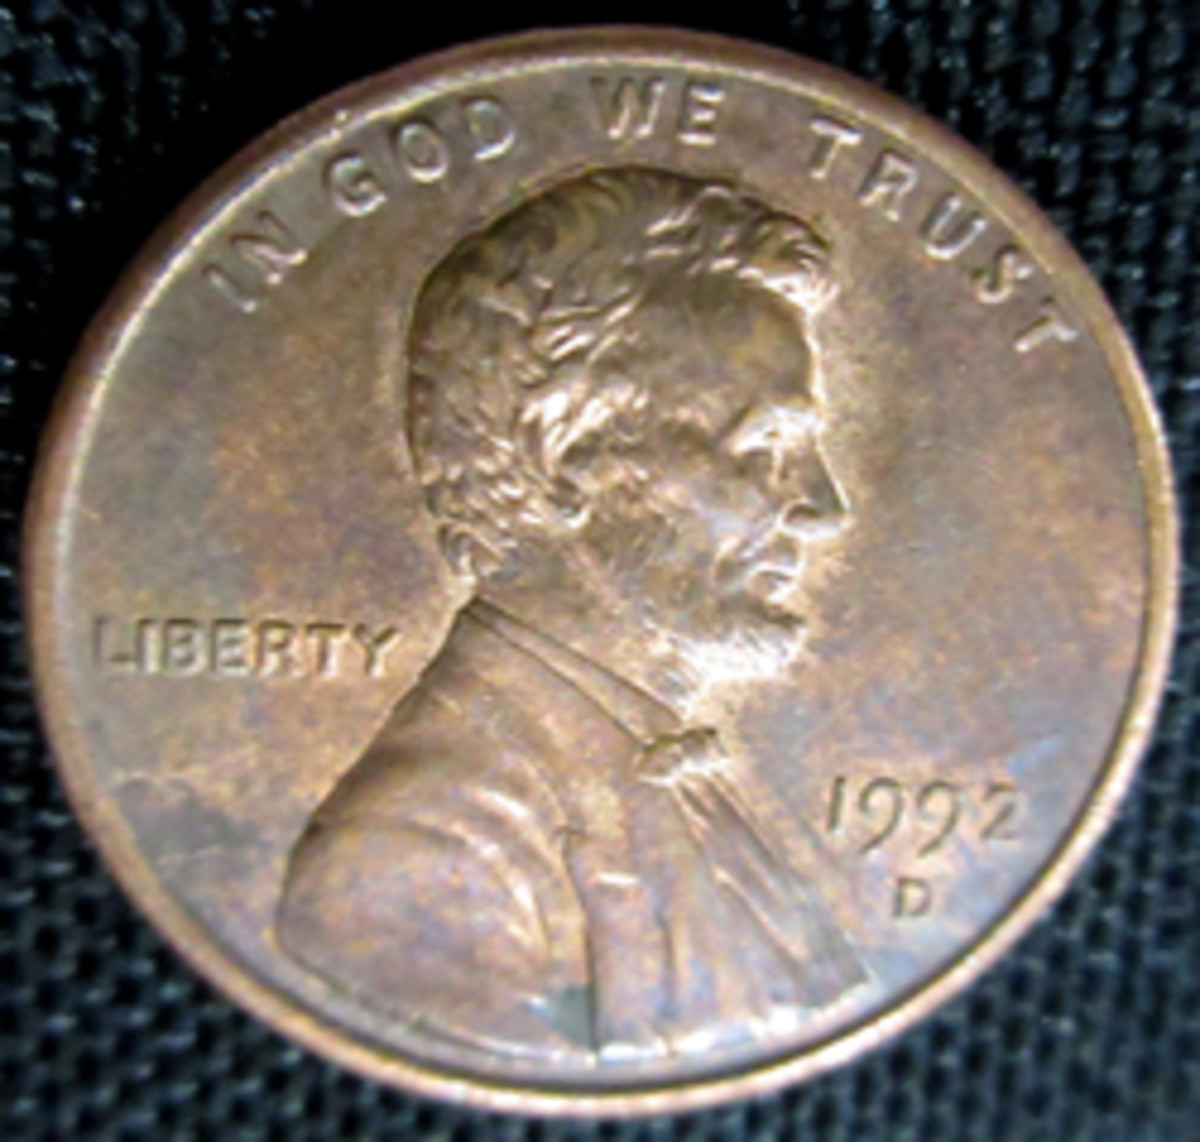  This is the obverse of the rare Close AM 1992-D cent. The error is entirely on the reverse. This photo was taken by James Motley.